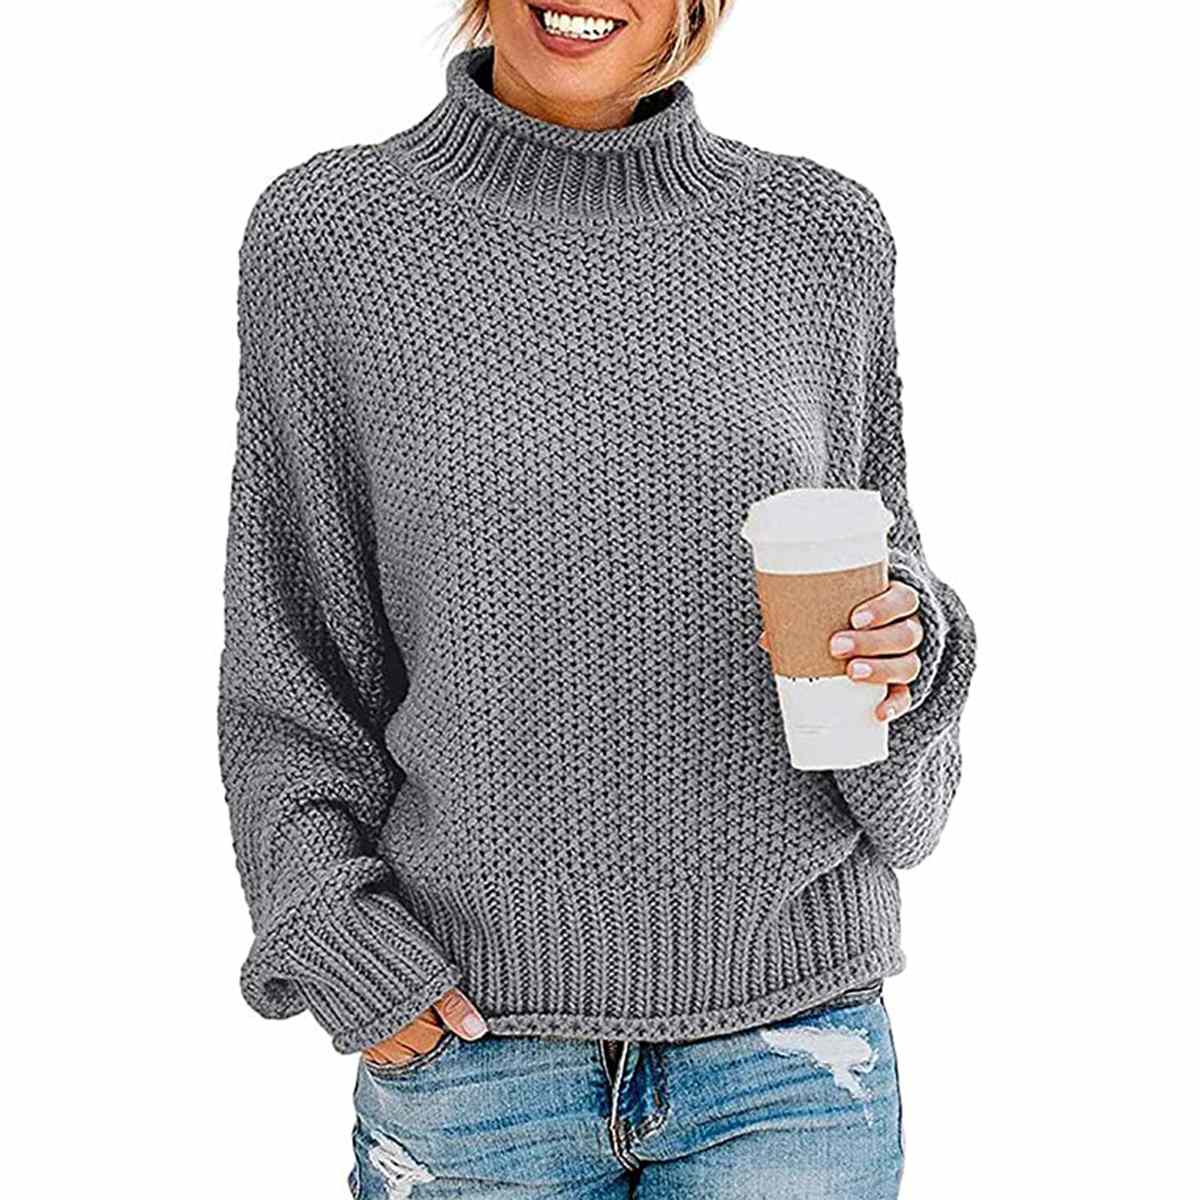 ZESICA Women's Turtleneck Batwing Sleeve Loose Oversized Chunky Knitted Pullover Sweater Jumper Tops